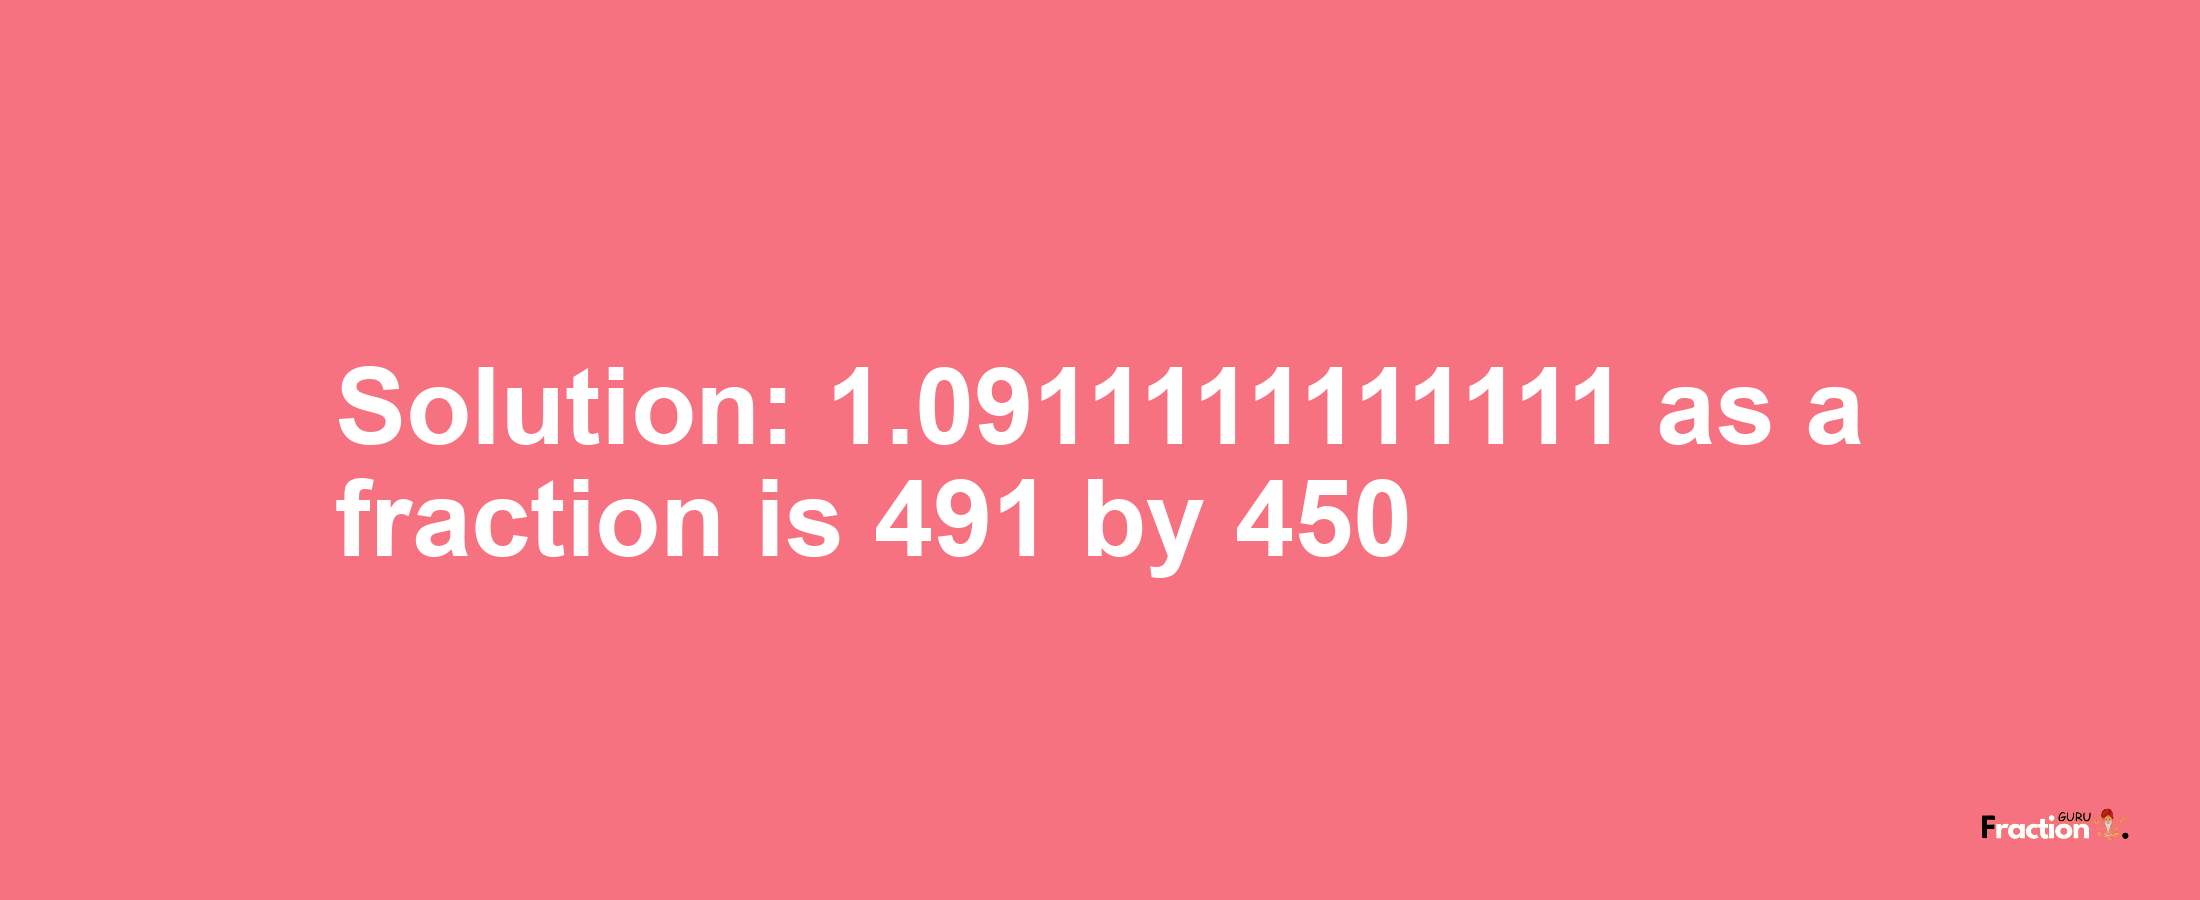 Solution:1.0911111111111 as a fraction is 491/450